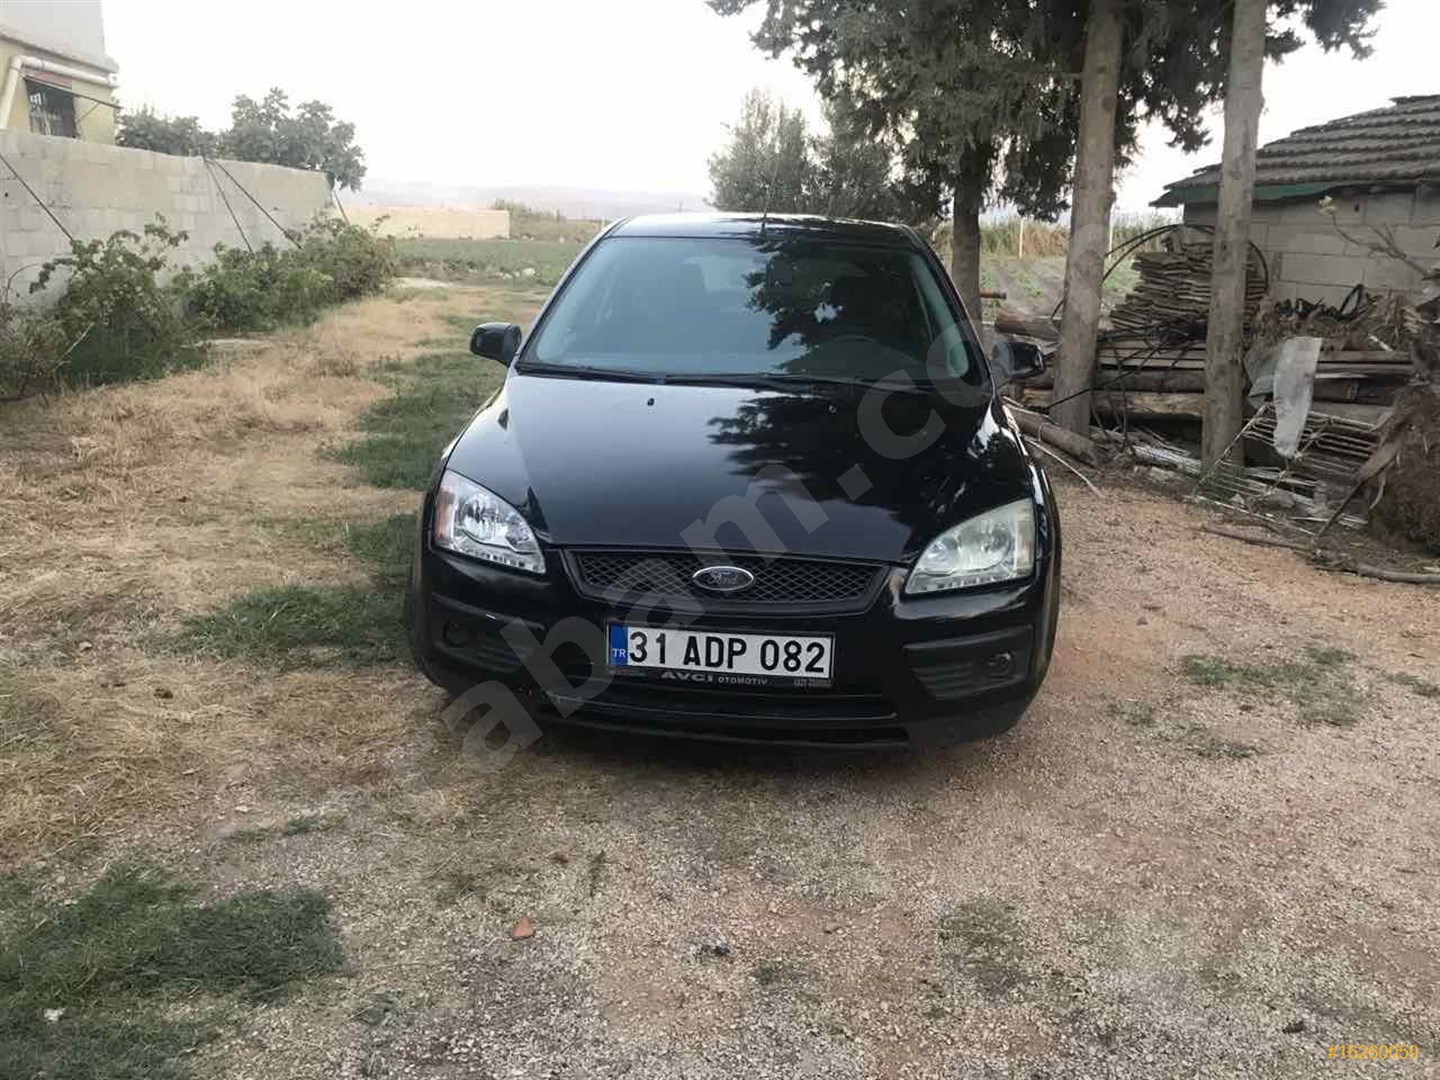 A Used Ford Focus 2017 for sale - Price : 430,000 Turkish ...